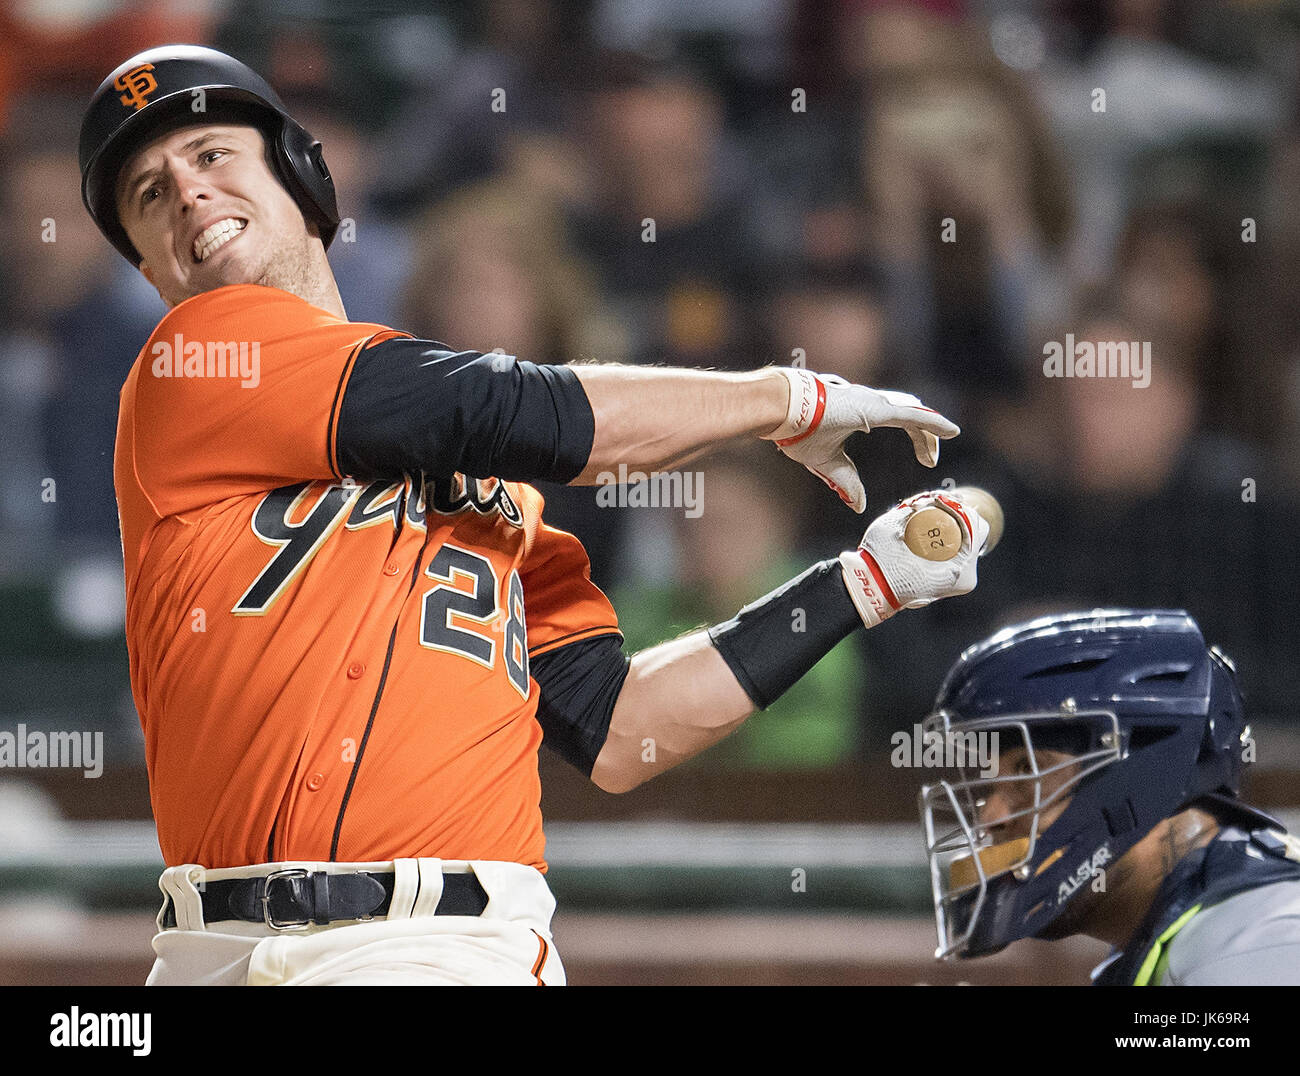 San Francisco, California, USA. 21st July, 2017. San Francisco Giants catcher Buster Posey (28) watches his ball go foul in the seventh inning, during a MLB game between the San Diego Padres and the San Francisco Giants at AT&T Park in San Francisco, California. Valerie Shoaps/CSM/Alamy Live News Stock Photo